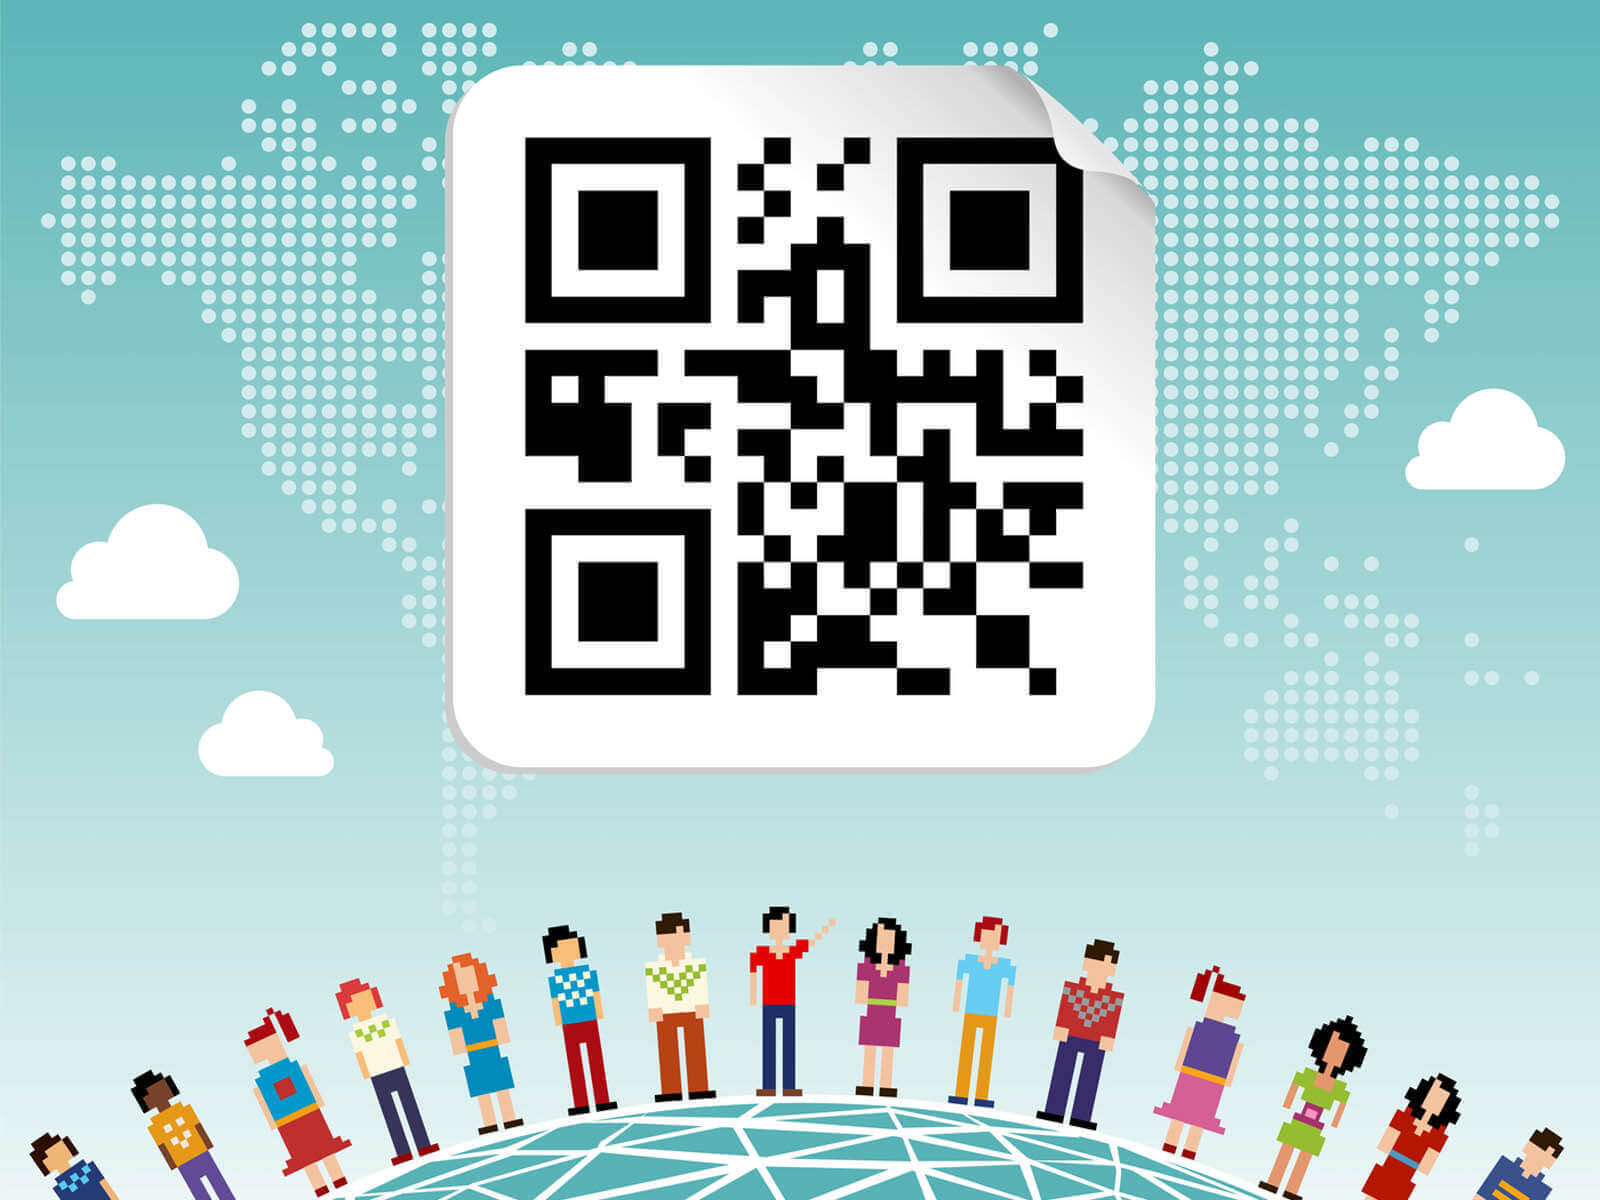 image to qr code converter online free